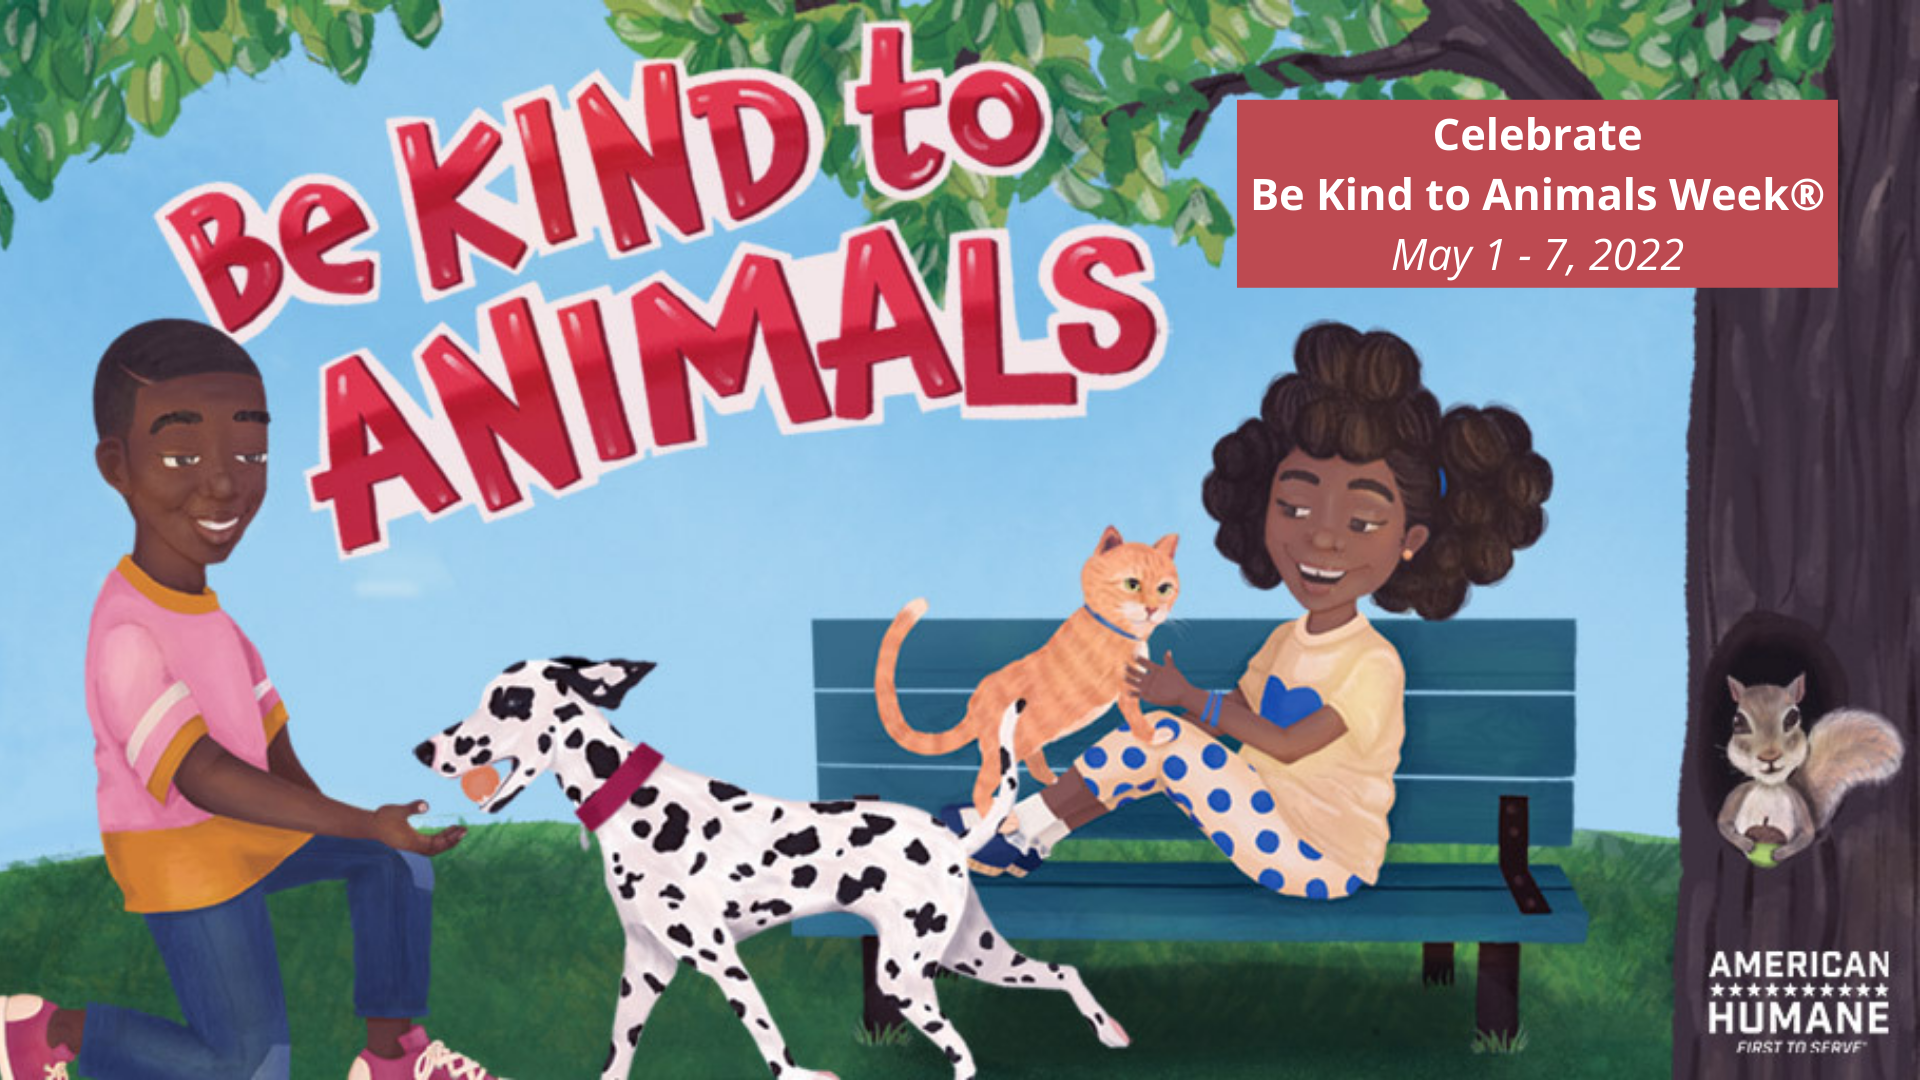 Be Kind to Animals Week is May 1-7